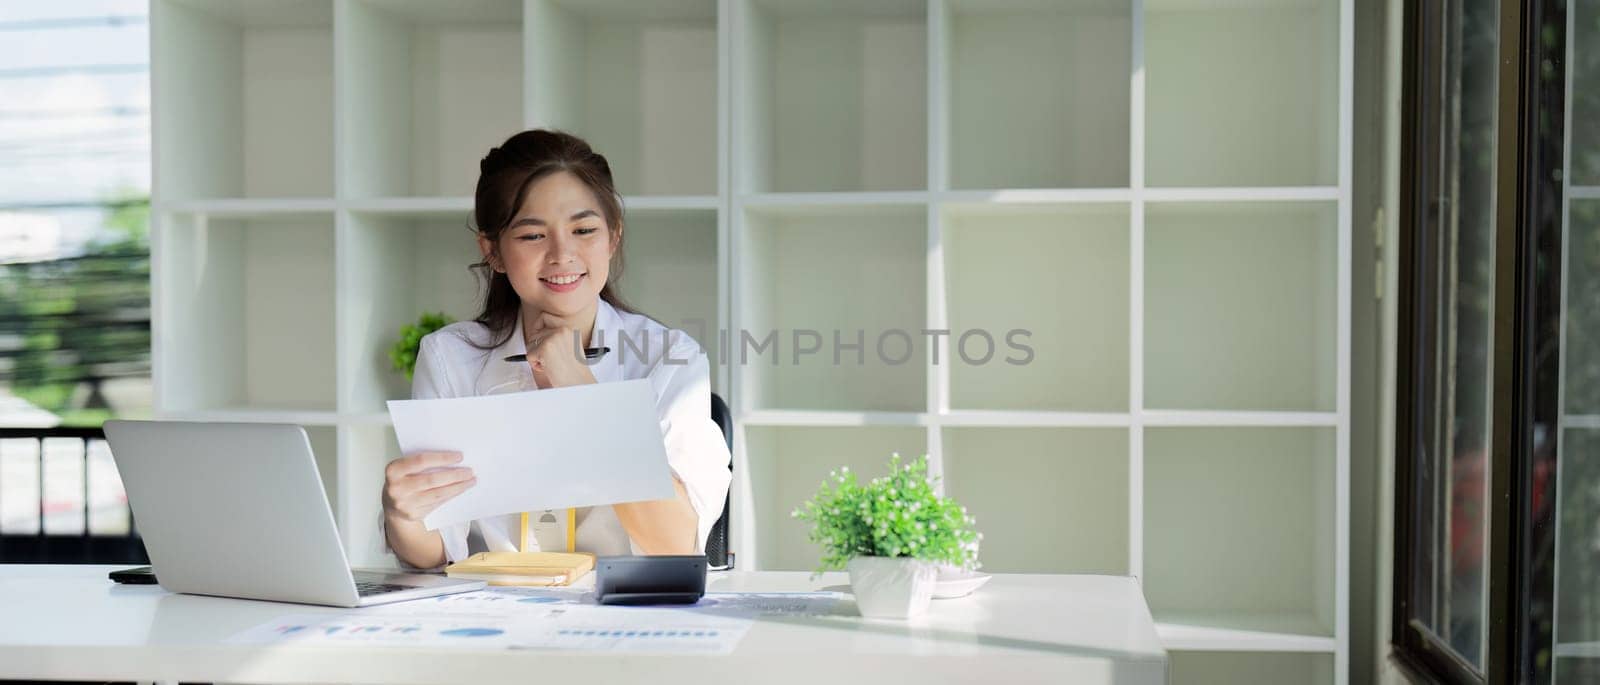 Business accounting woman counting on calculator working on financial document in hands closeup. Bookkeeping concept.